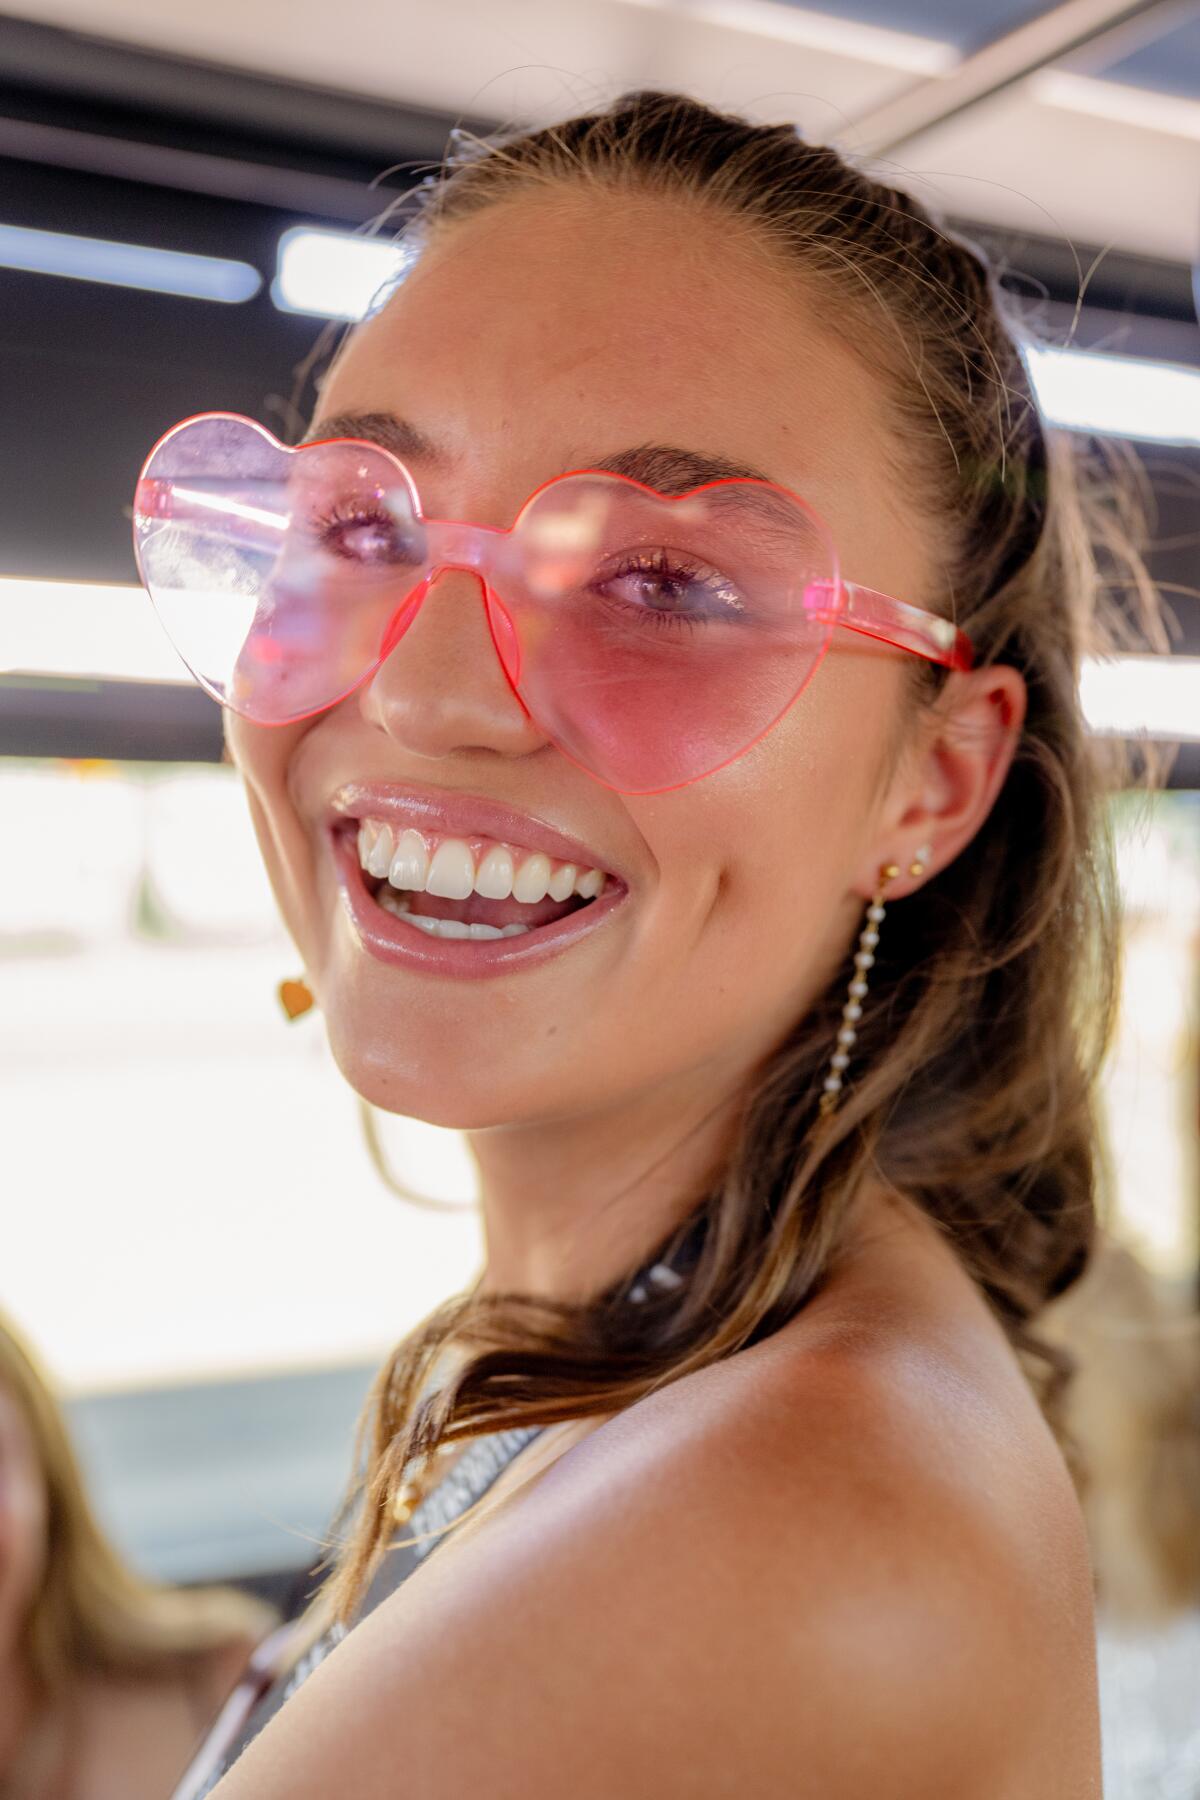 A young woman smiles, wearing pink hear-shaped sunglasses.